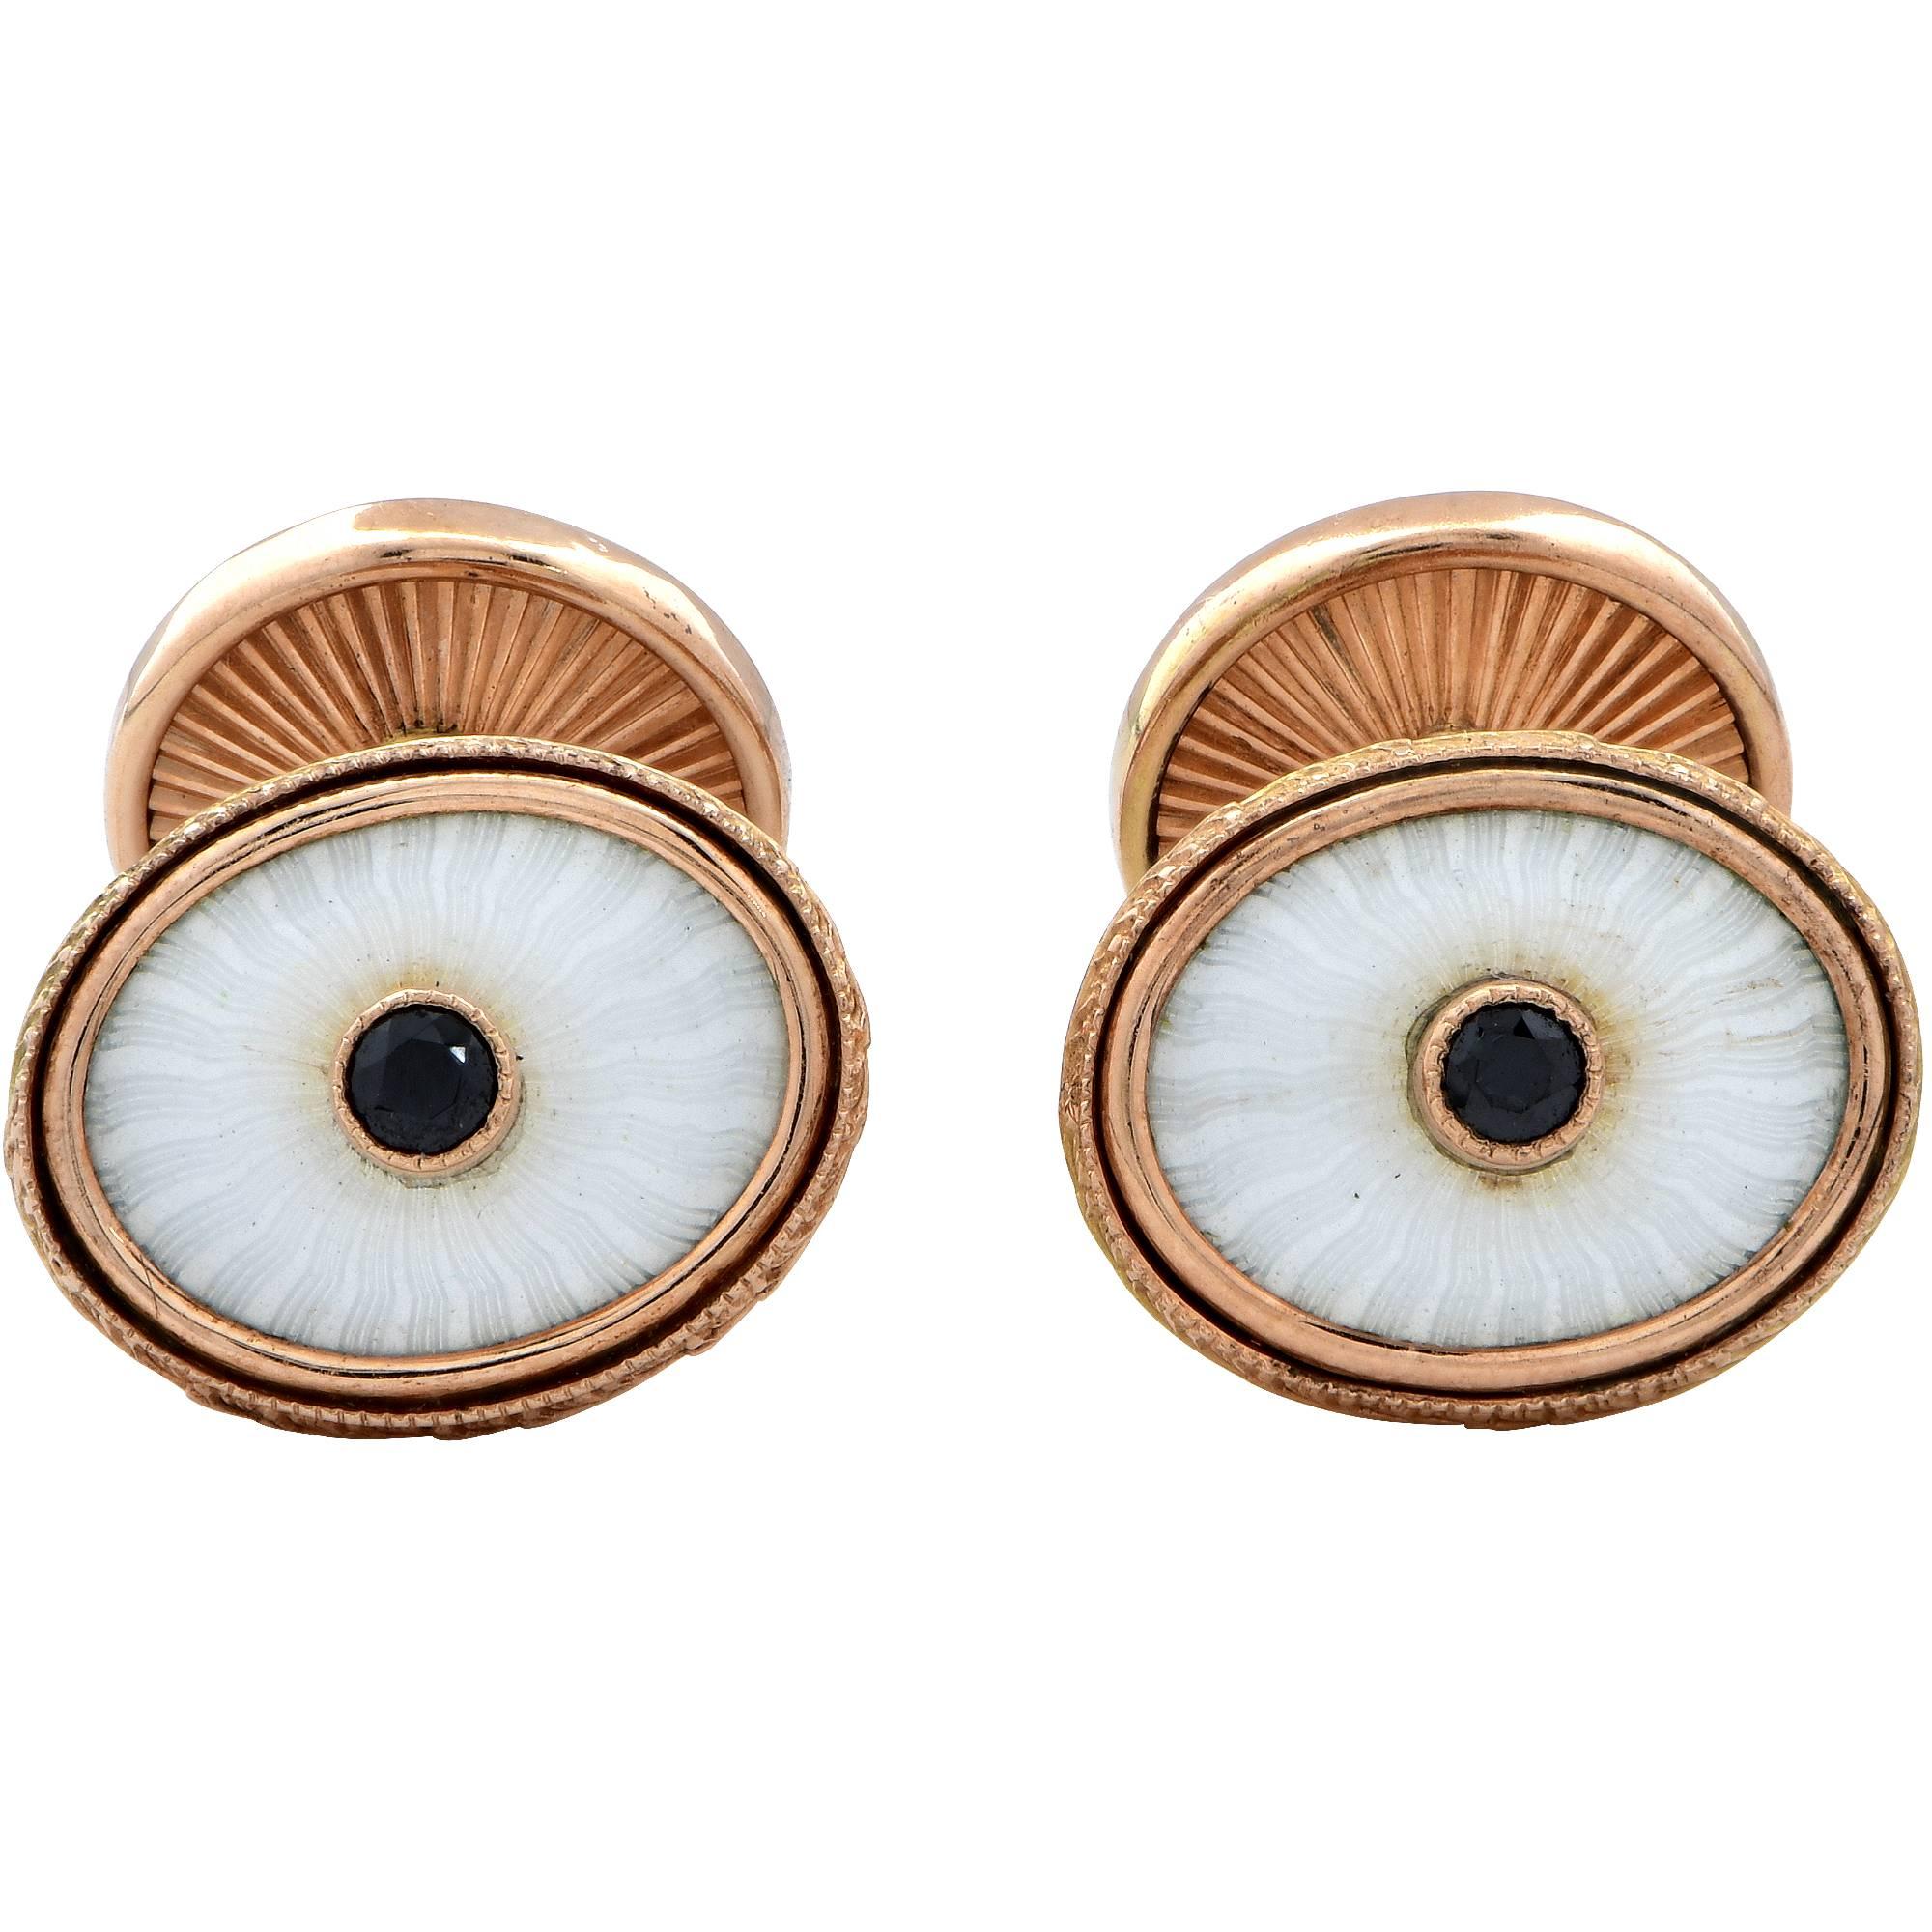 14k Yellow Gold Onyx and Enamel Cuff Links